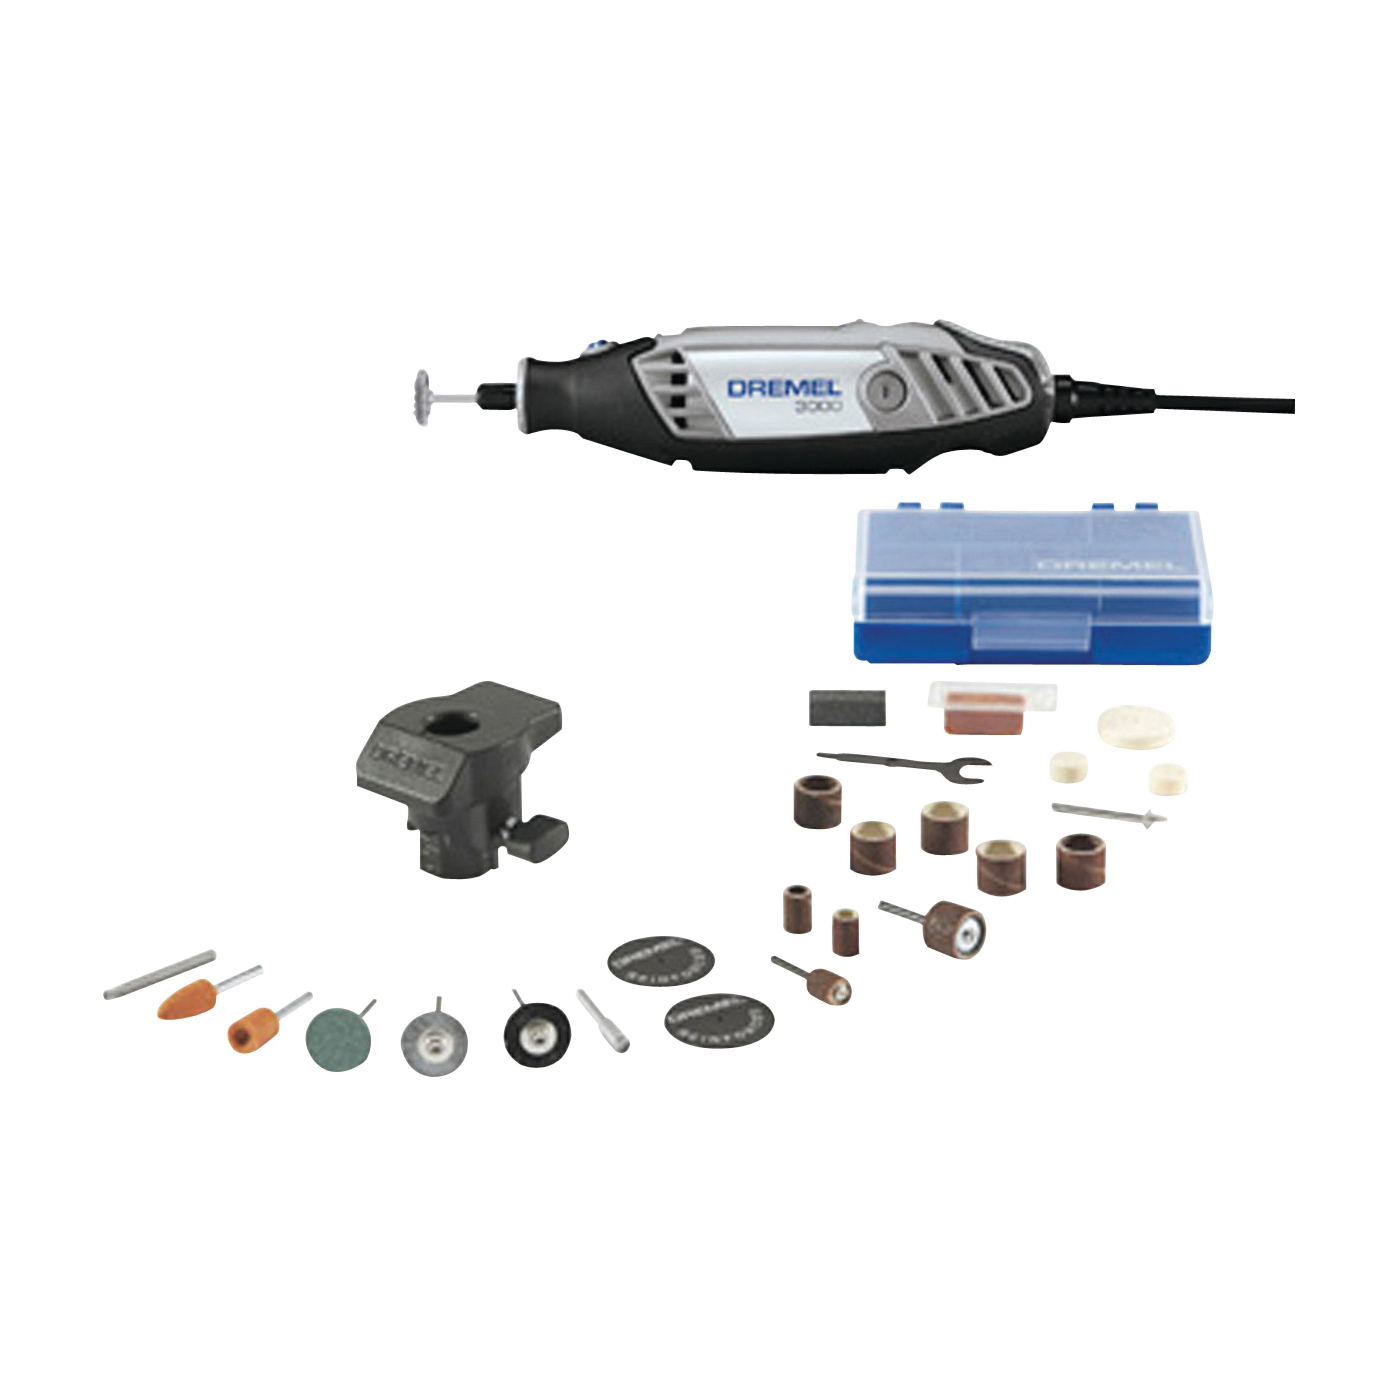 3000-1/24 Rotary Tool Kit, 1.2 A, 1/32 to 1/8 in Chuck, Keyed Chuck, 5000 to 35,000 rpm Speed